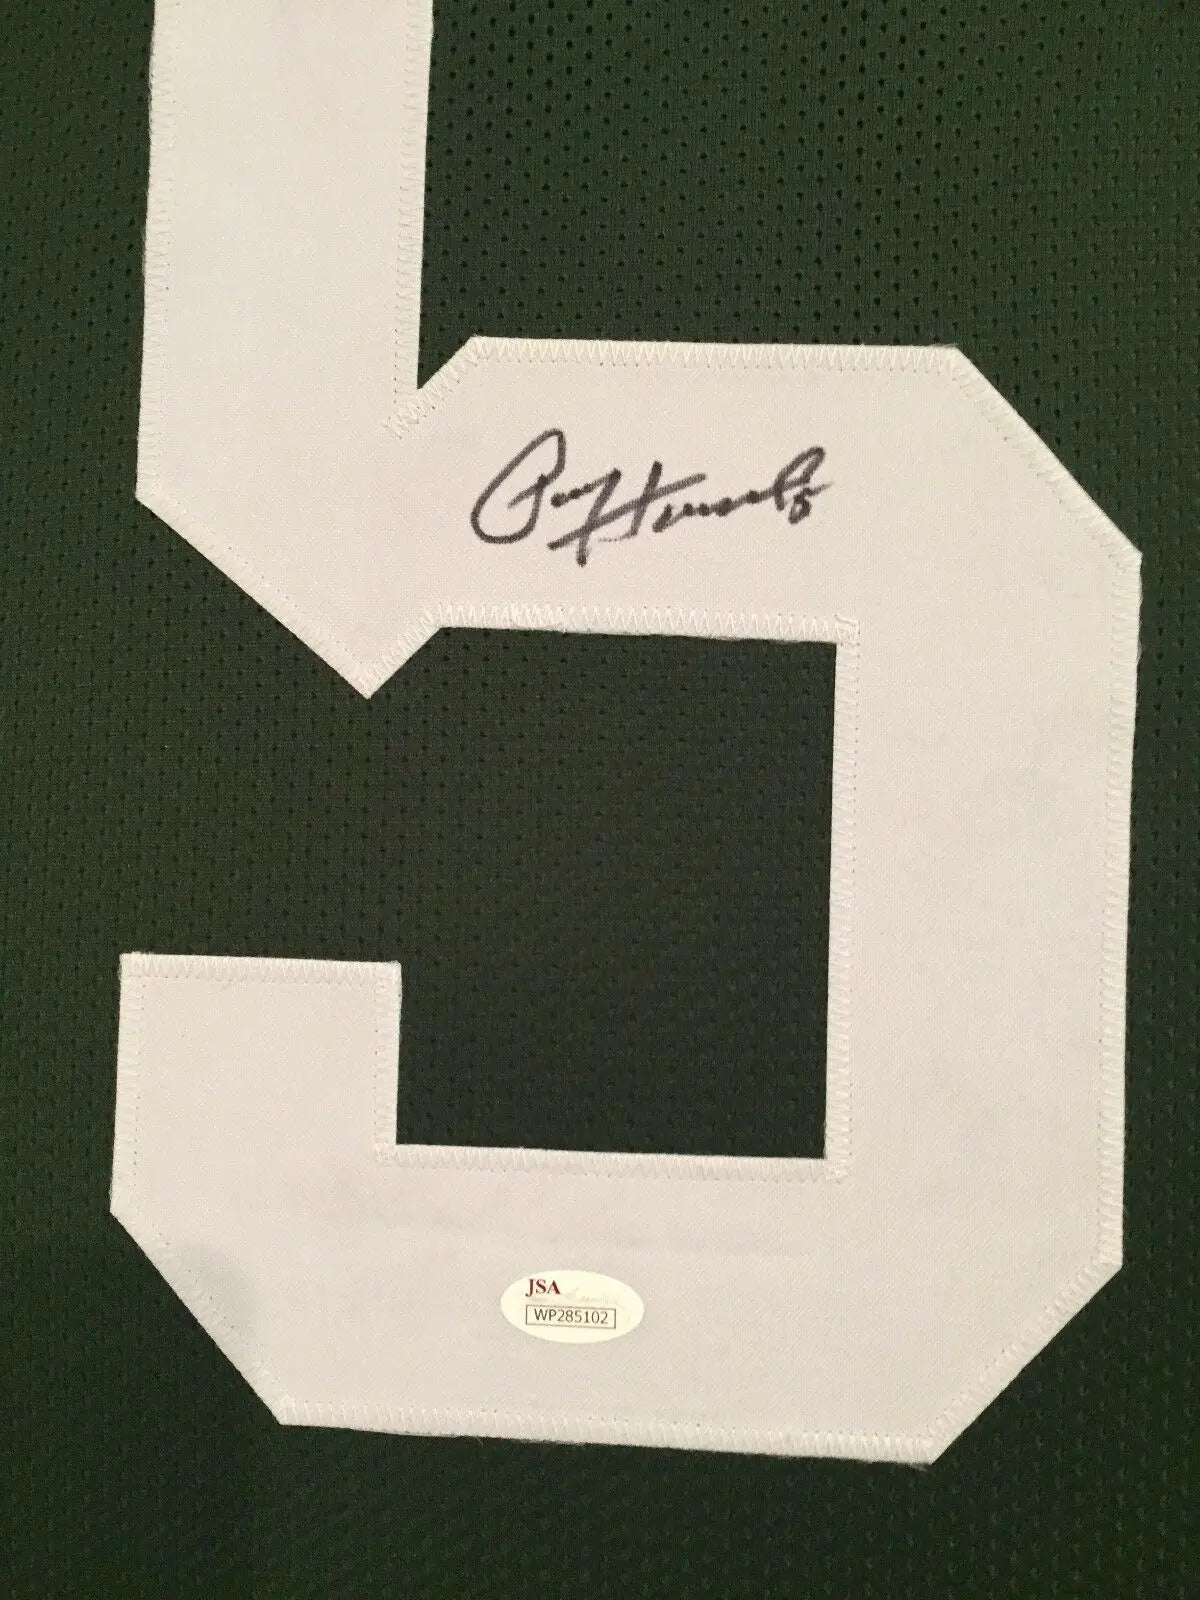 MVP Authentics Framed Paul Hornung Autographed Signed Greenbay Packers Jersey Jsa Coa 450 sports jersey framing , jersey framing